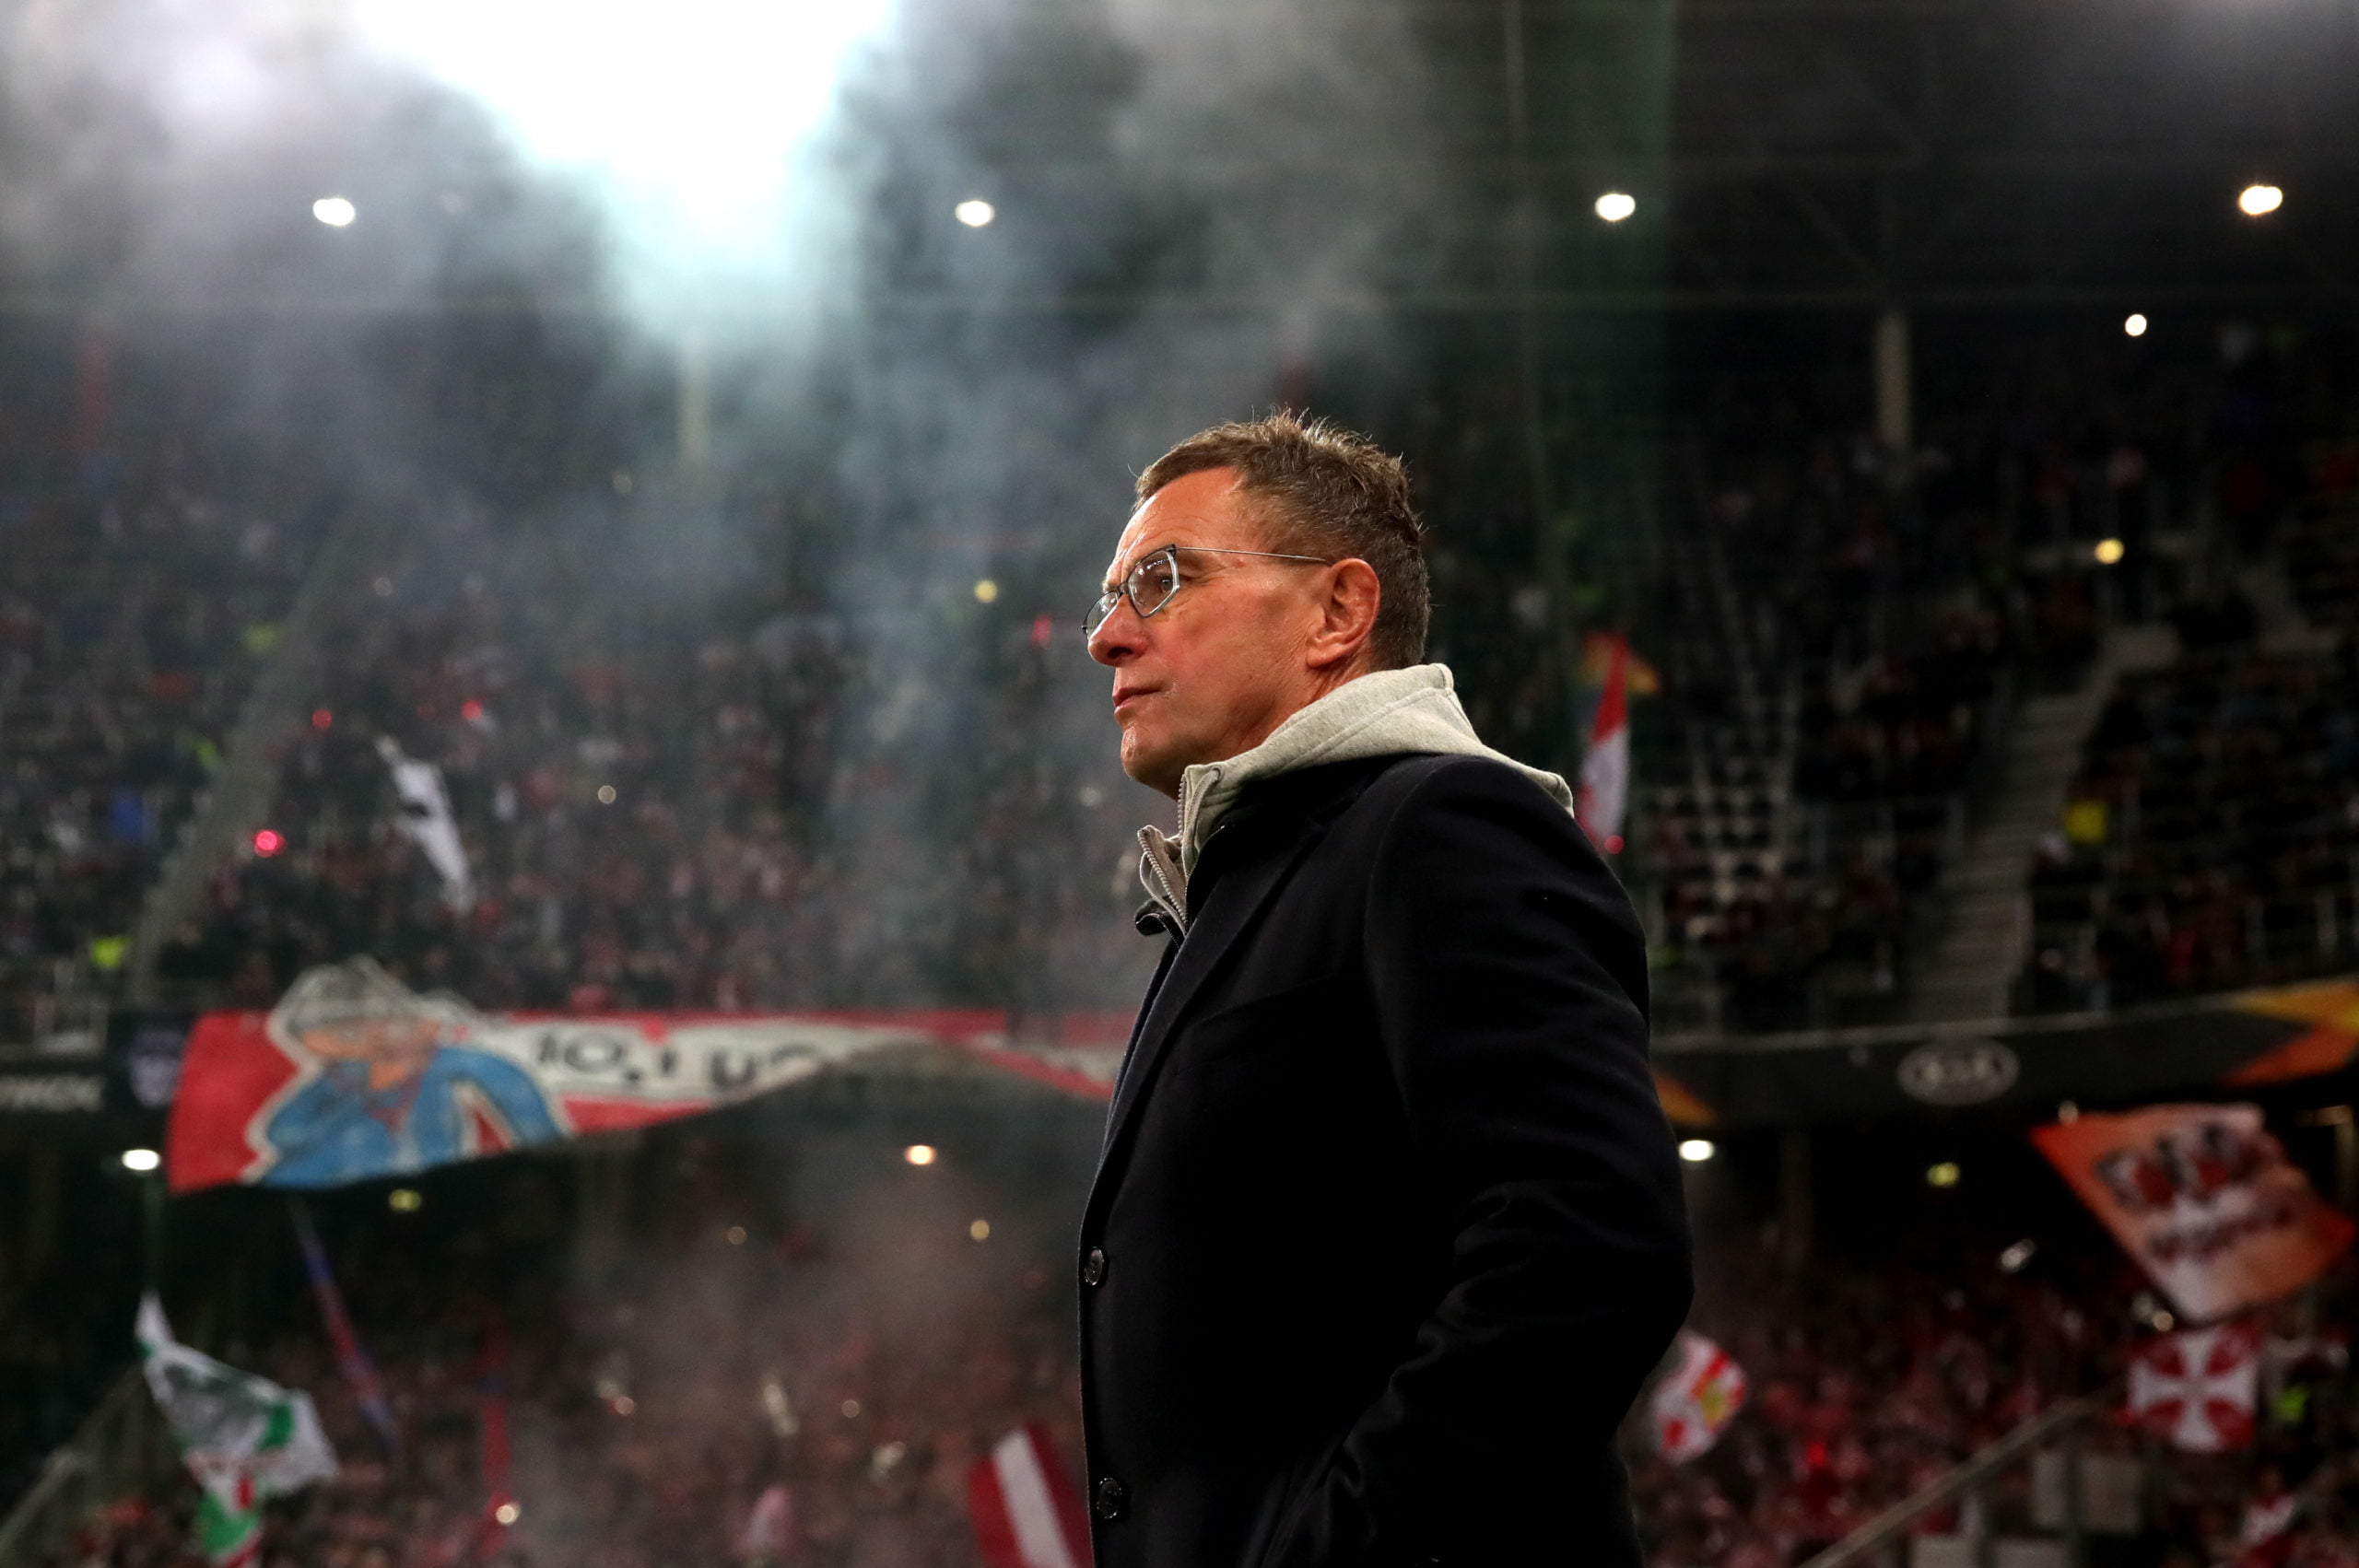 Newcastle United are eyeing a move for Ralf Rangnick - The perfect man for the job.